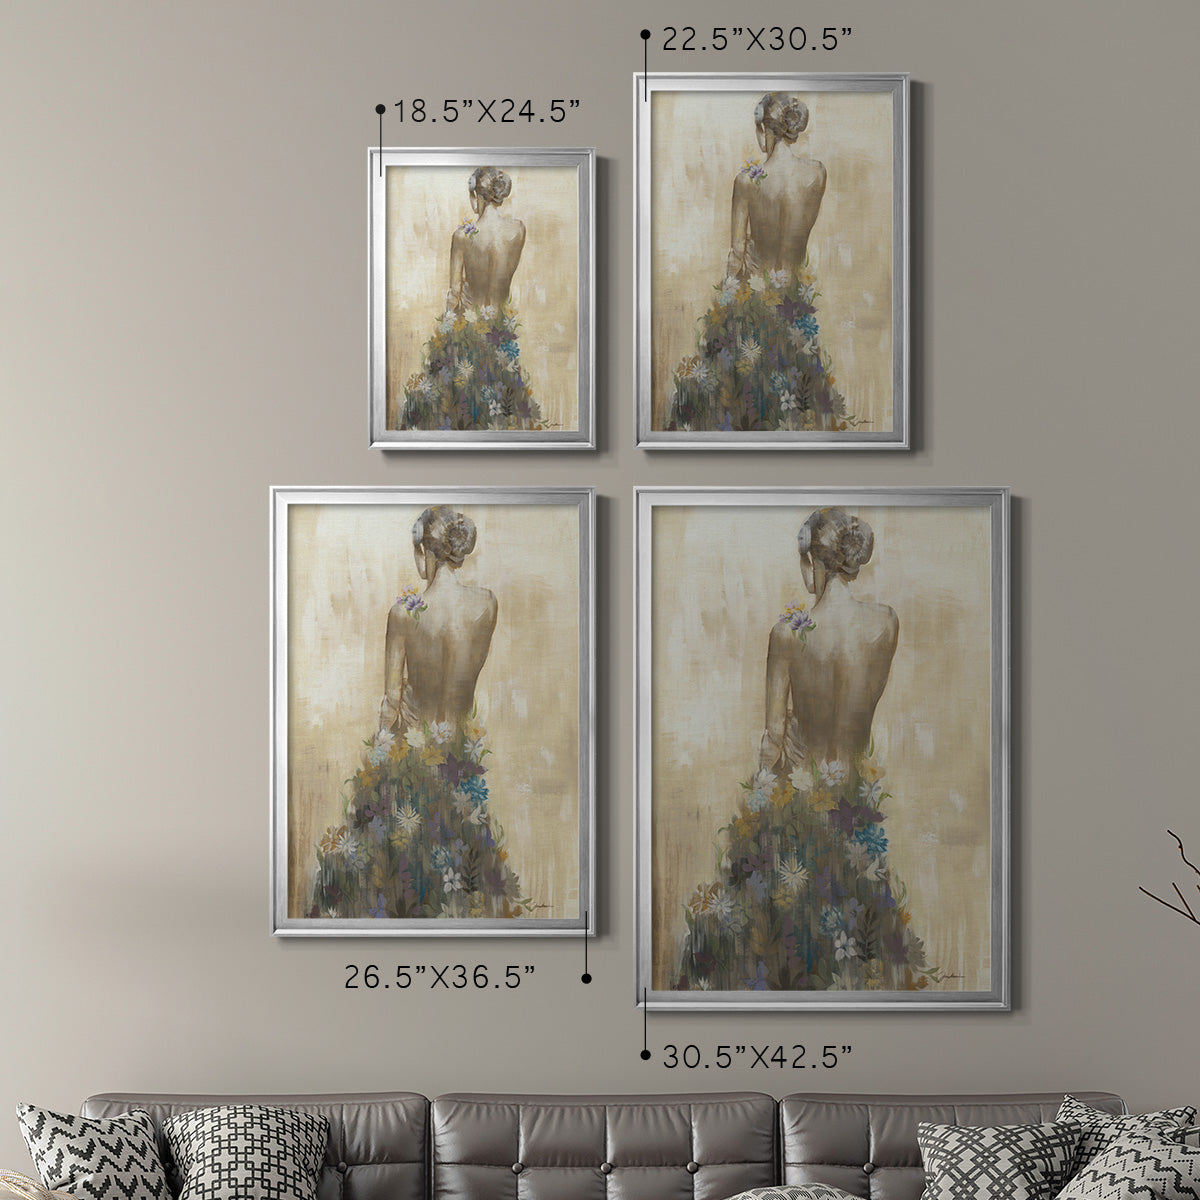 Garden Gown Premium Framed Print - Ready to Hang